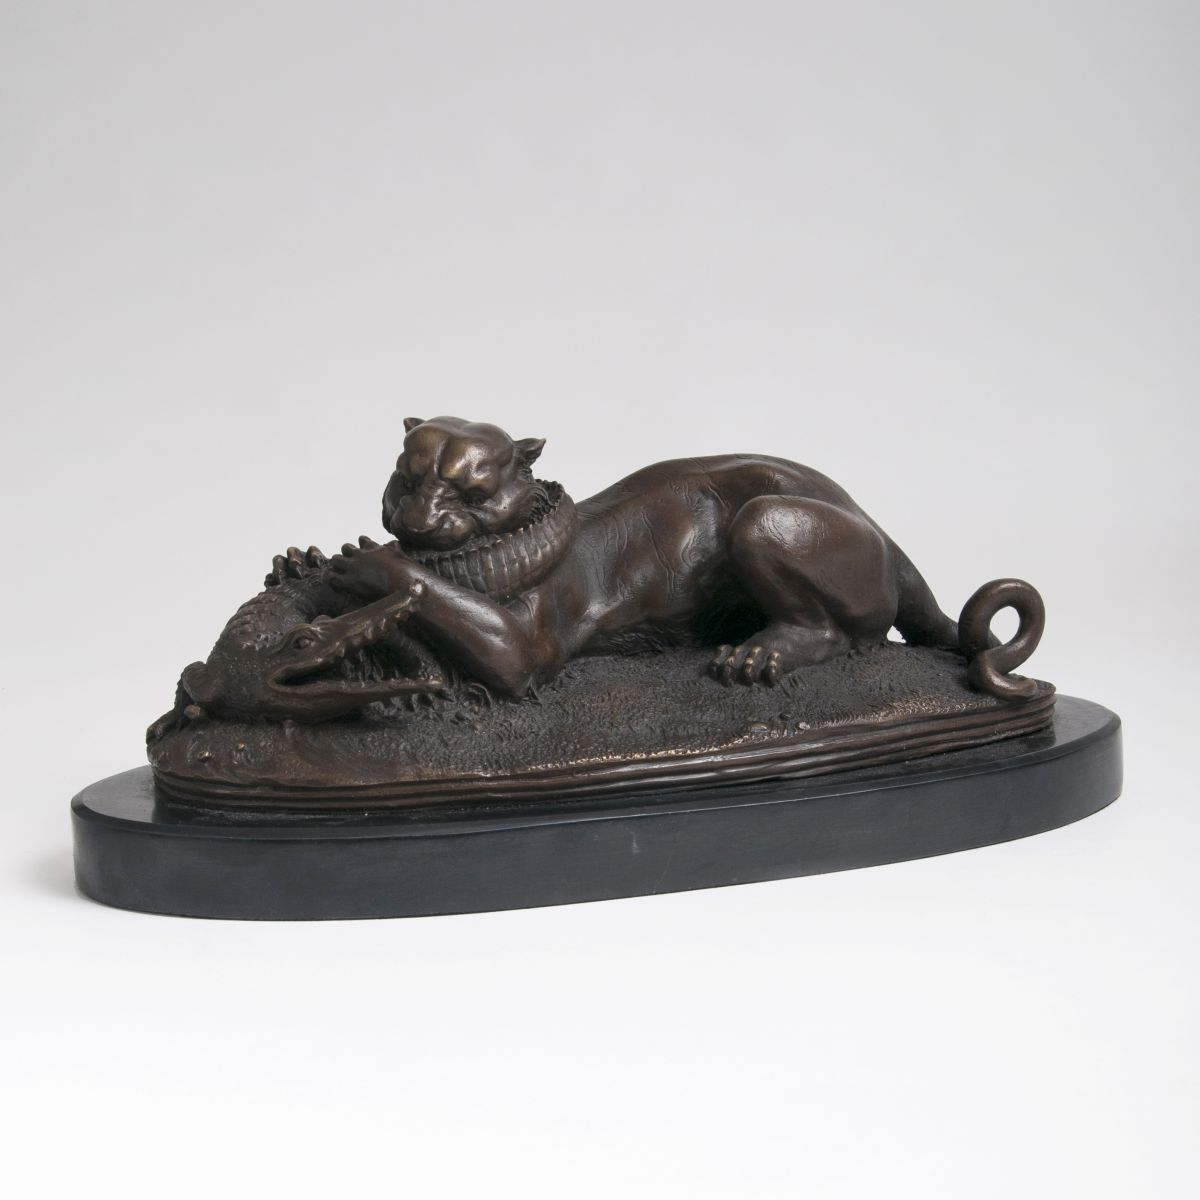 A Bronze Sculpture 'Panther and Alligator in Action'